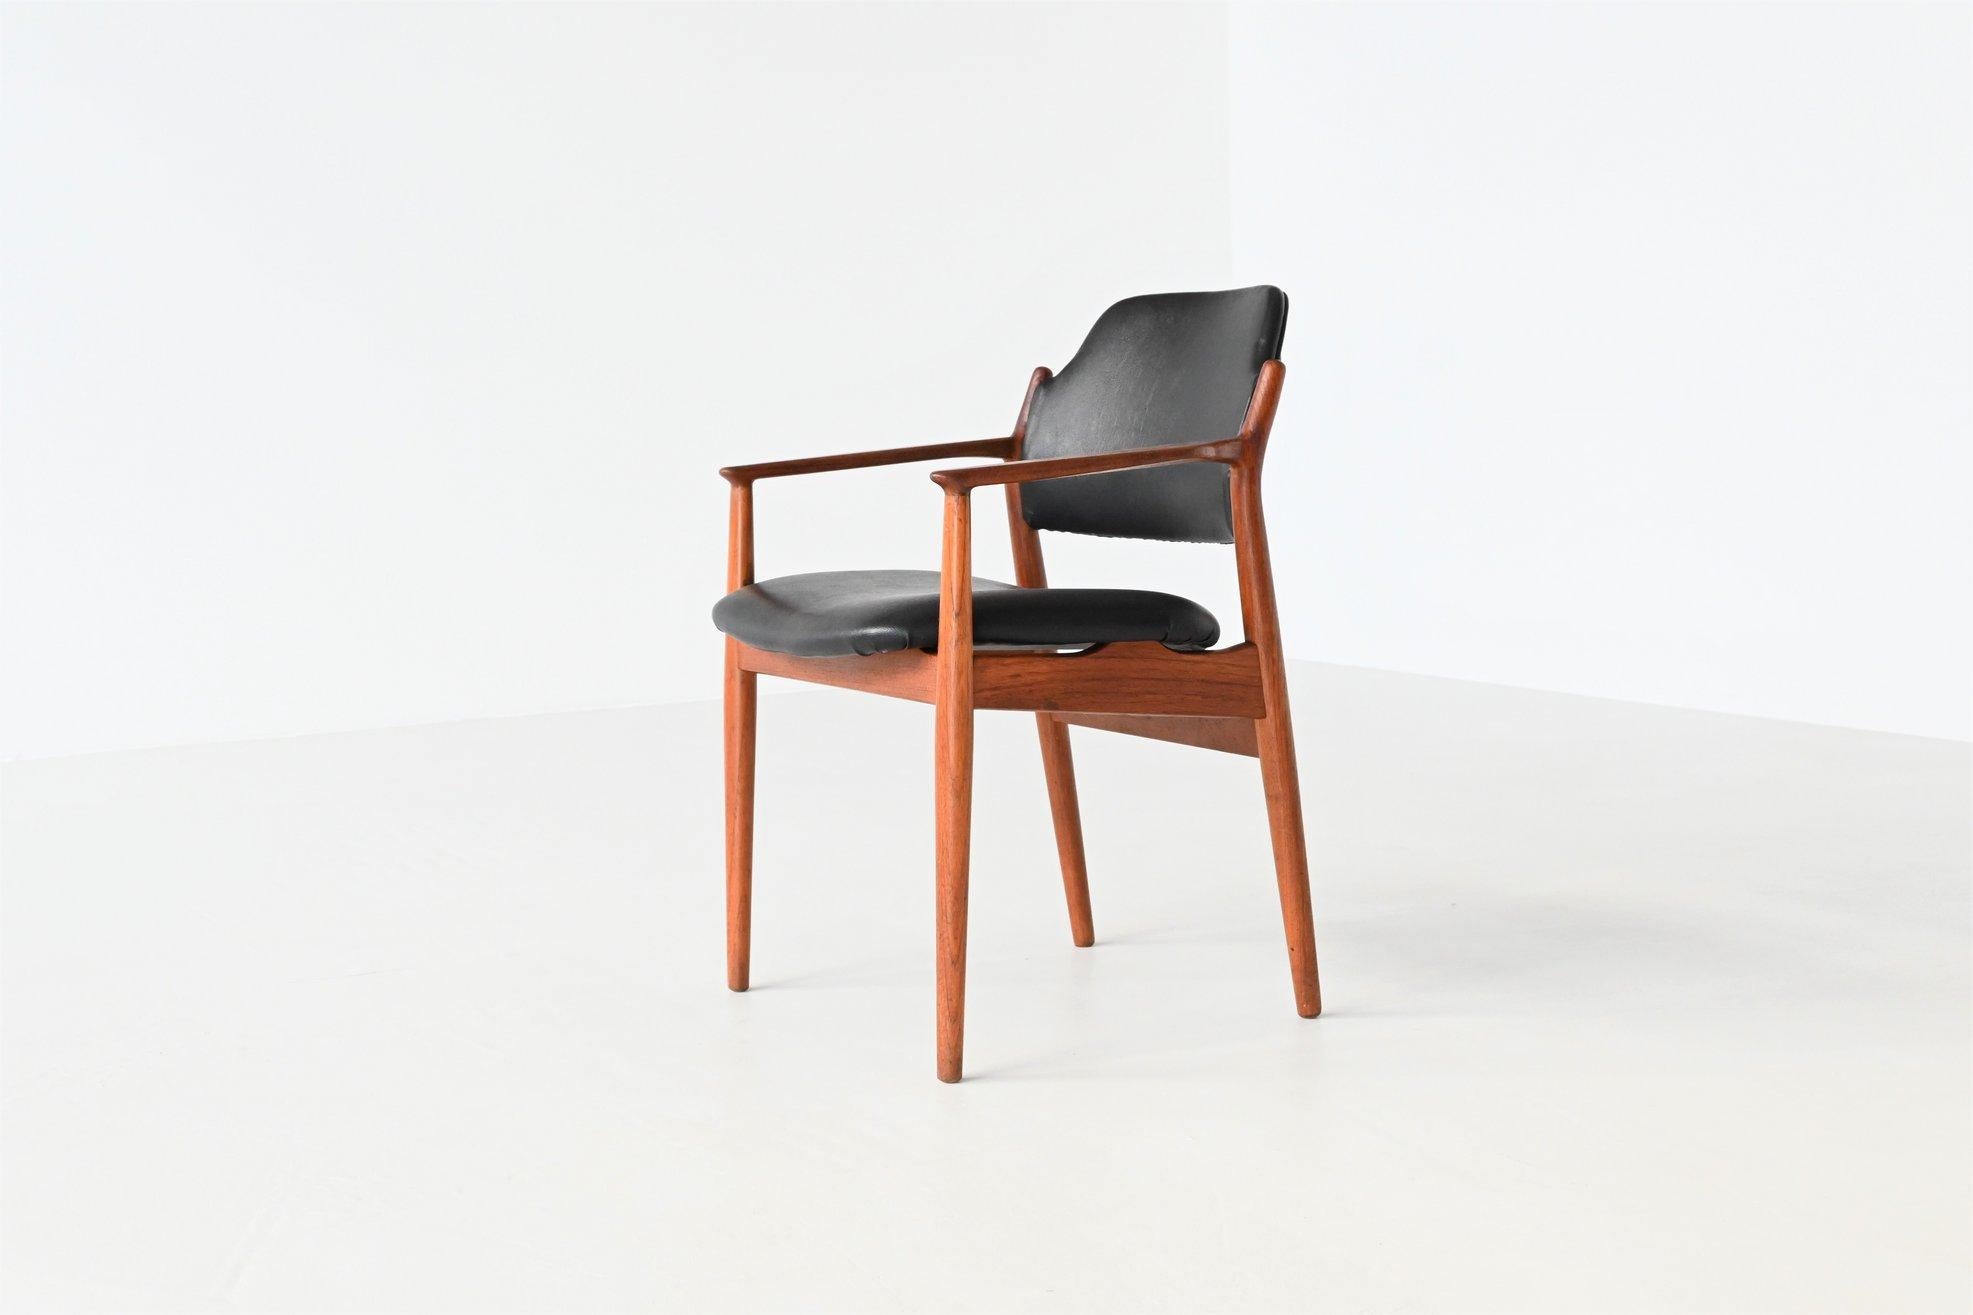 Beautiful shaped armchair or desk chair designed by Arne Vodder and manufactured by Sibast Møbler, Denmark 1960. The frame is made of solid teak wood and the seat and back are upholstered with original black faux leather. Extremely comfortable and a